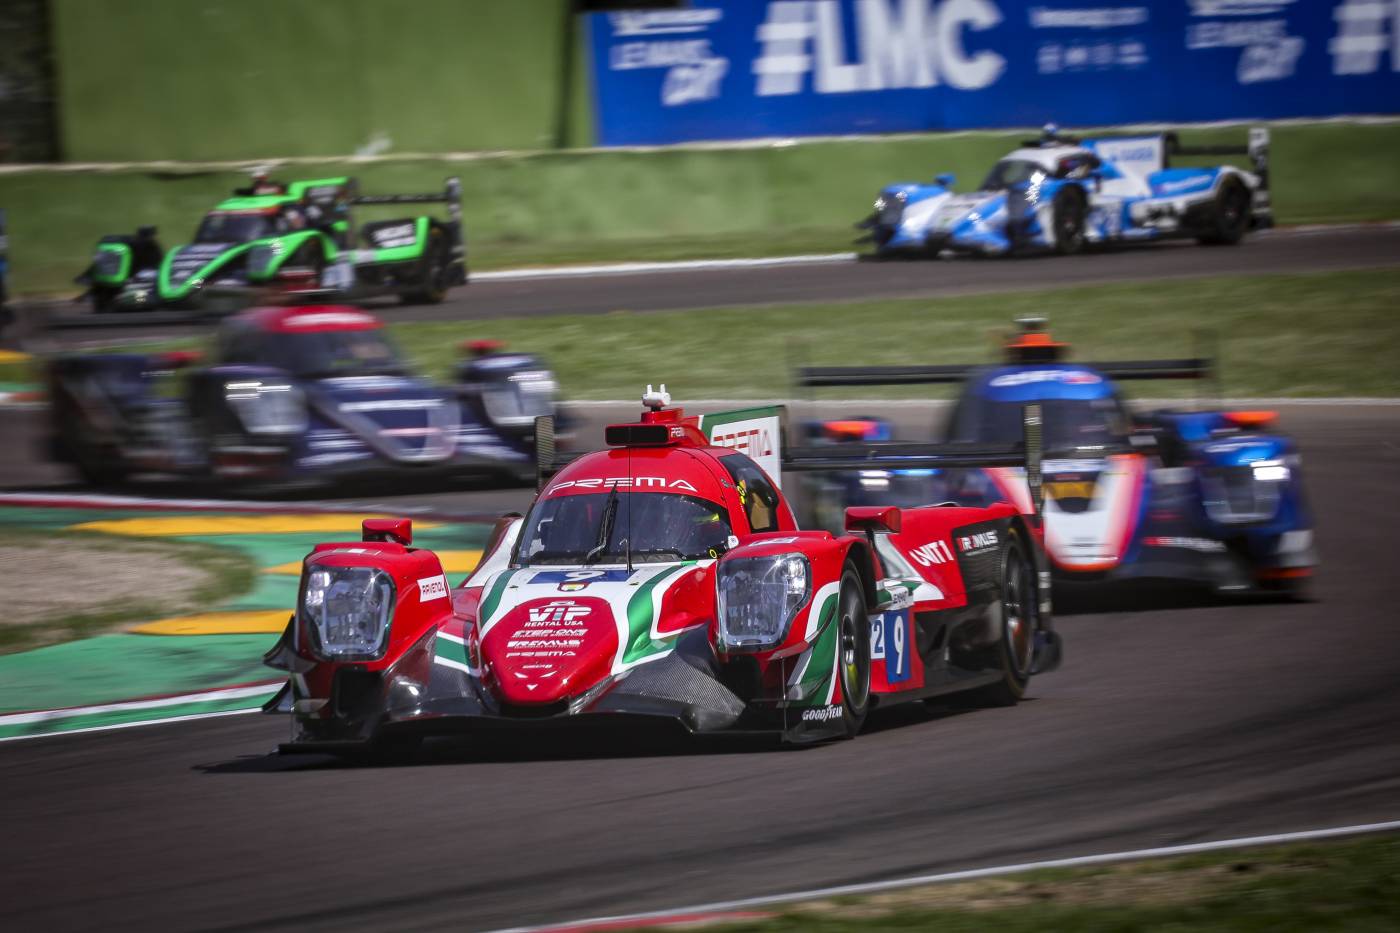 Prema Racing wins at the end of the suspense in Imola